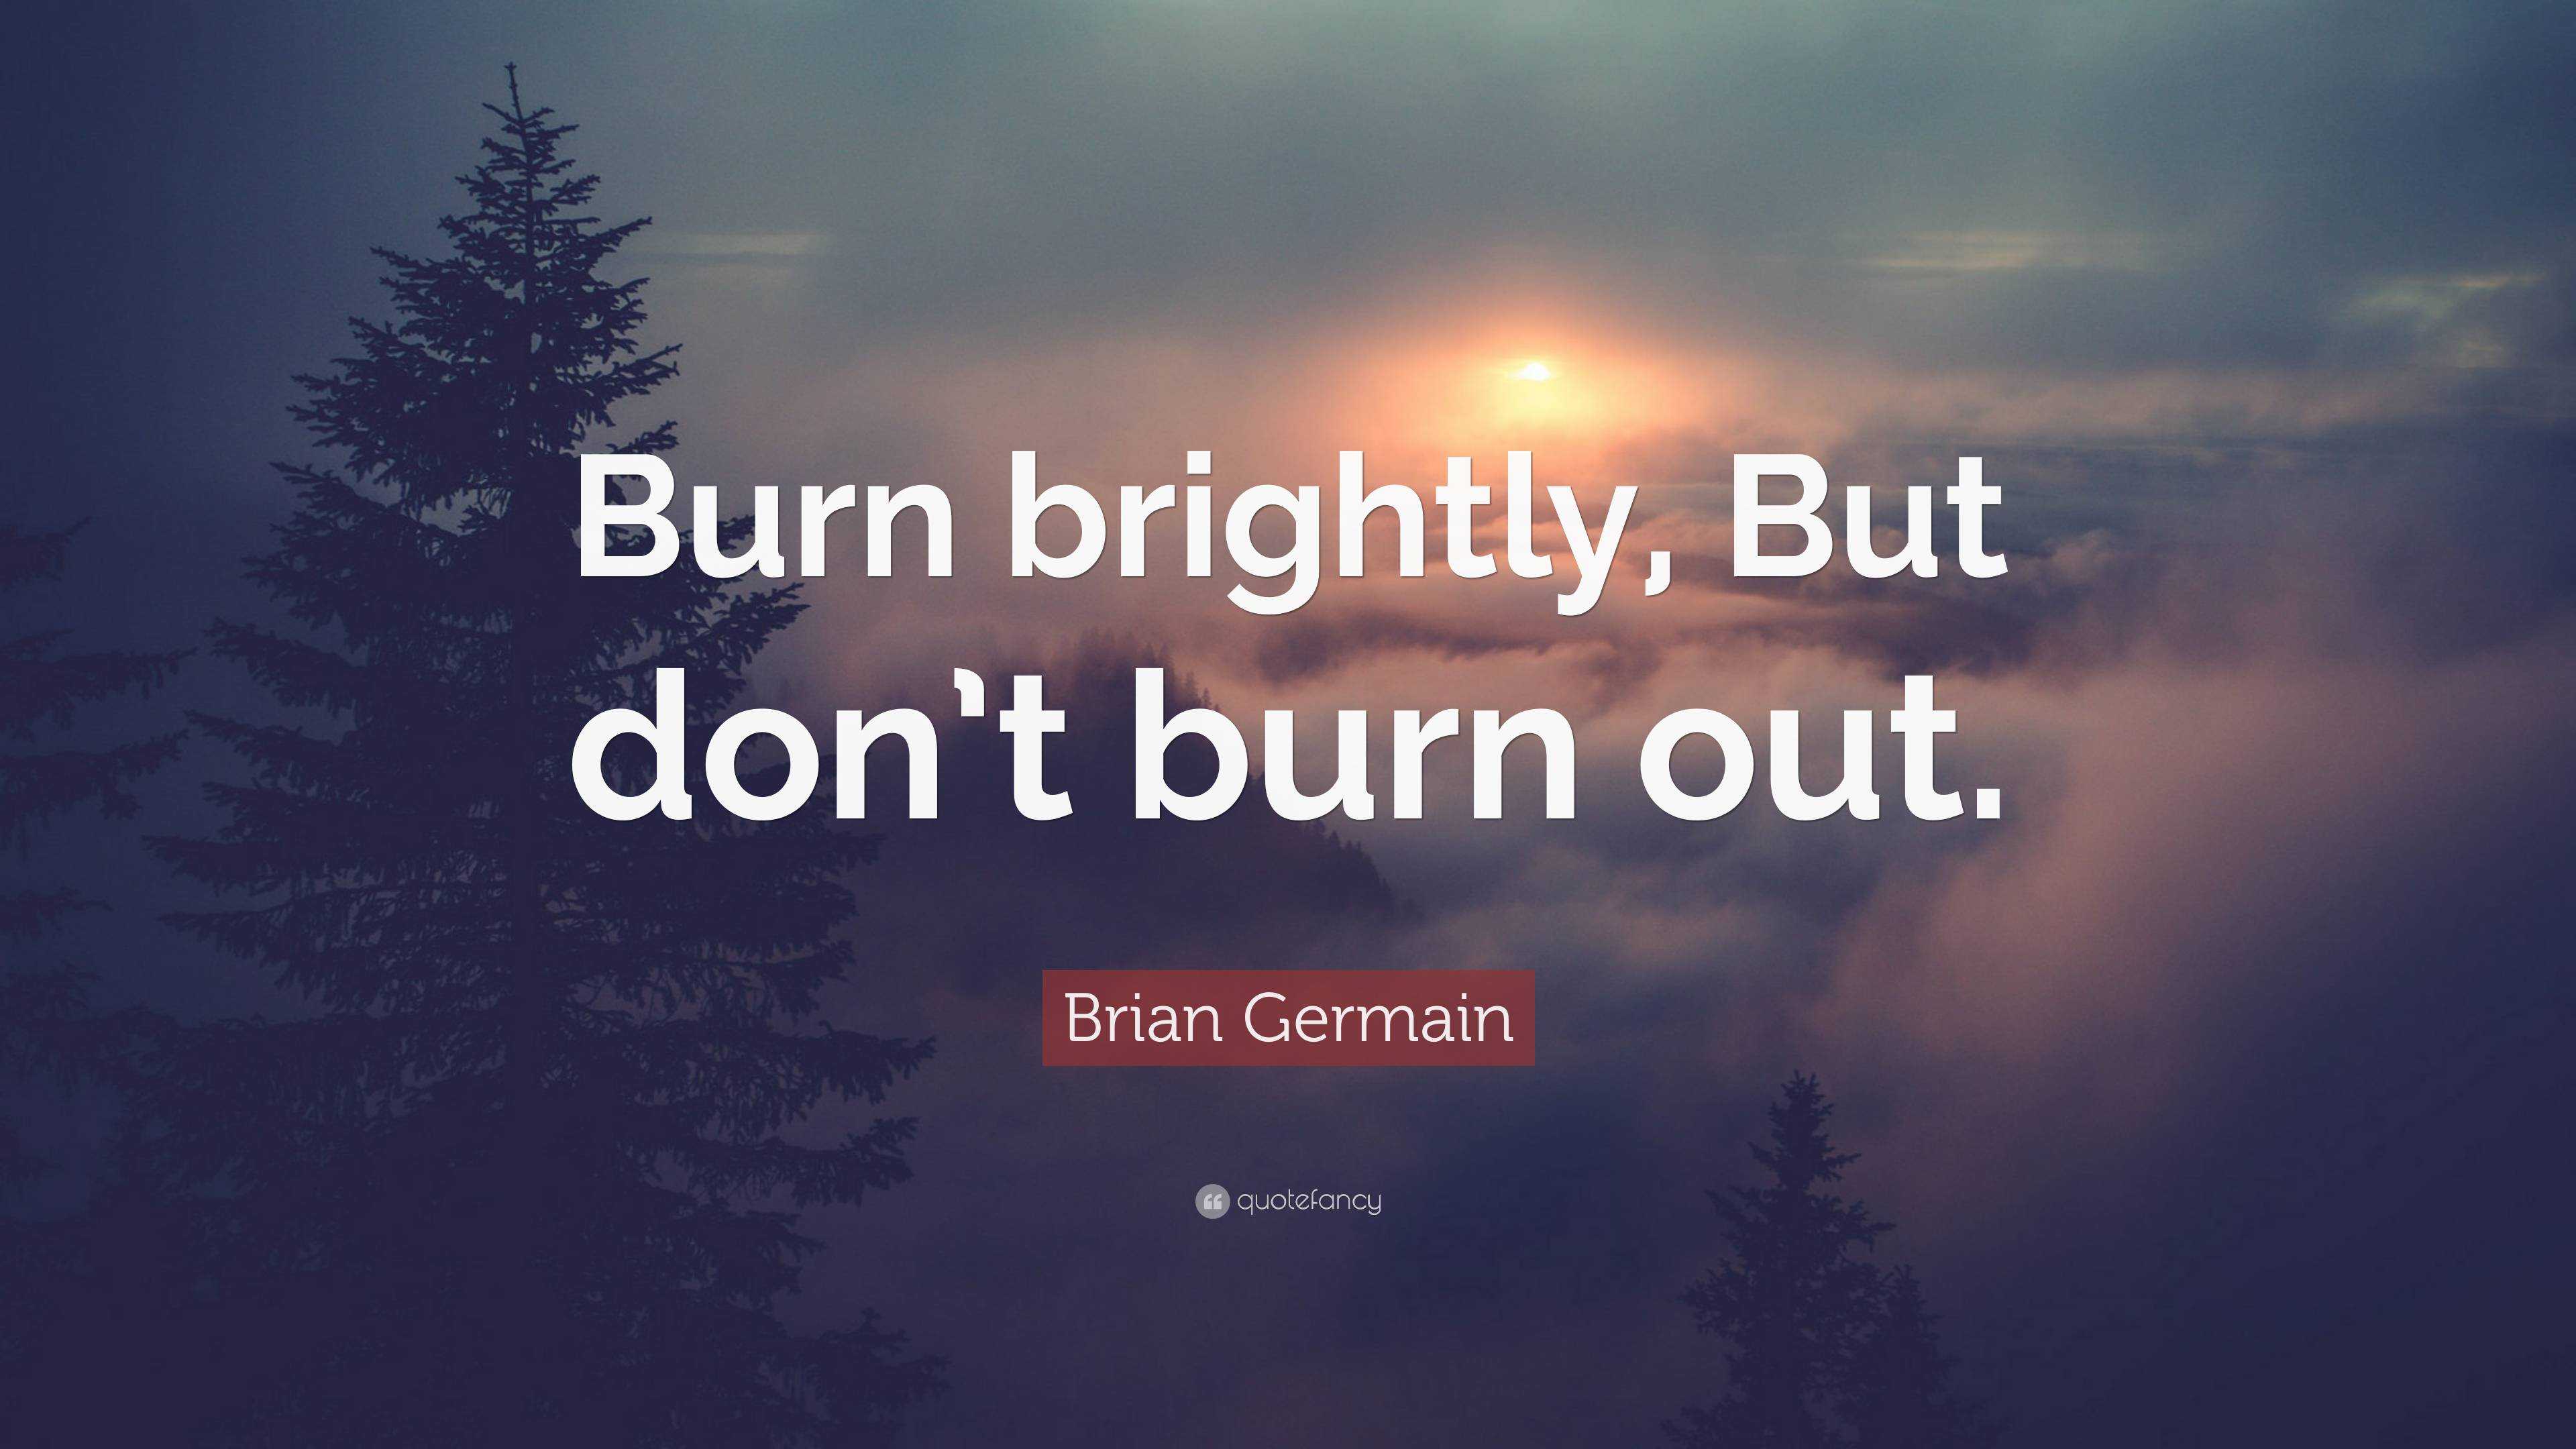 Brian Germain Quote: “Burn brightly, But don't burn out.”